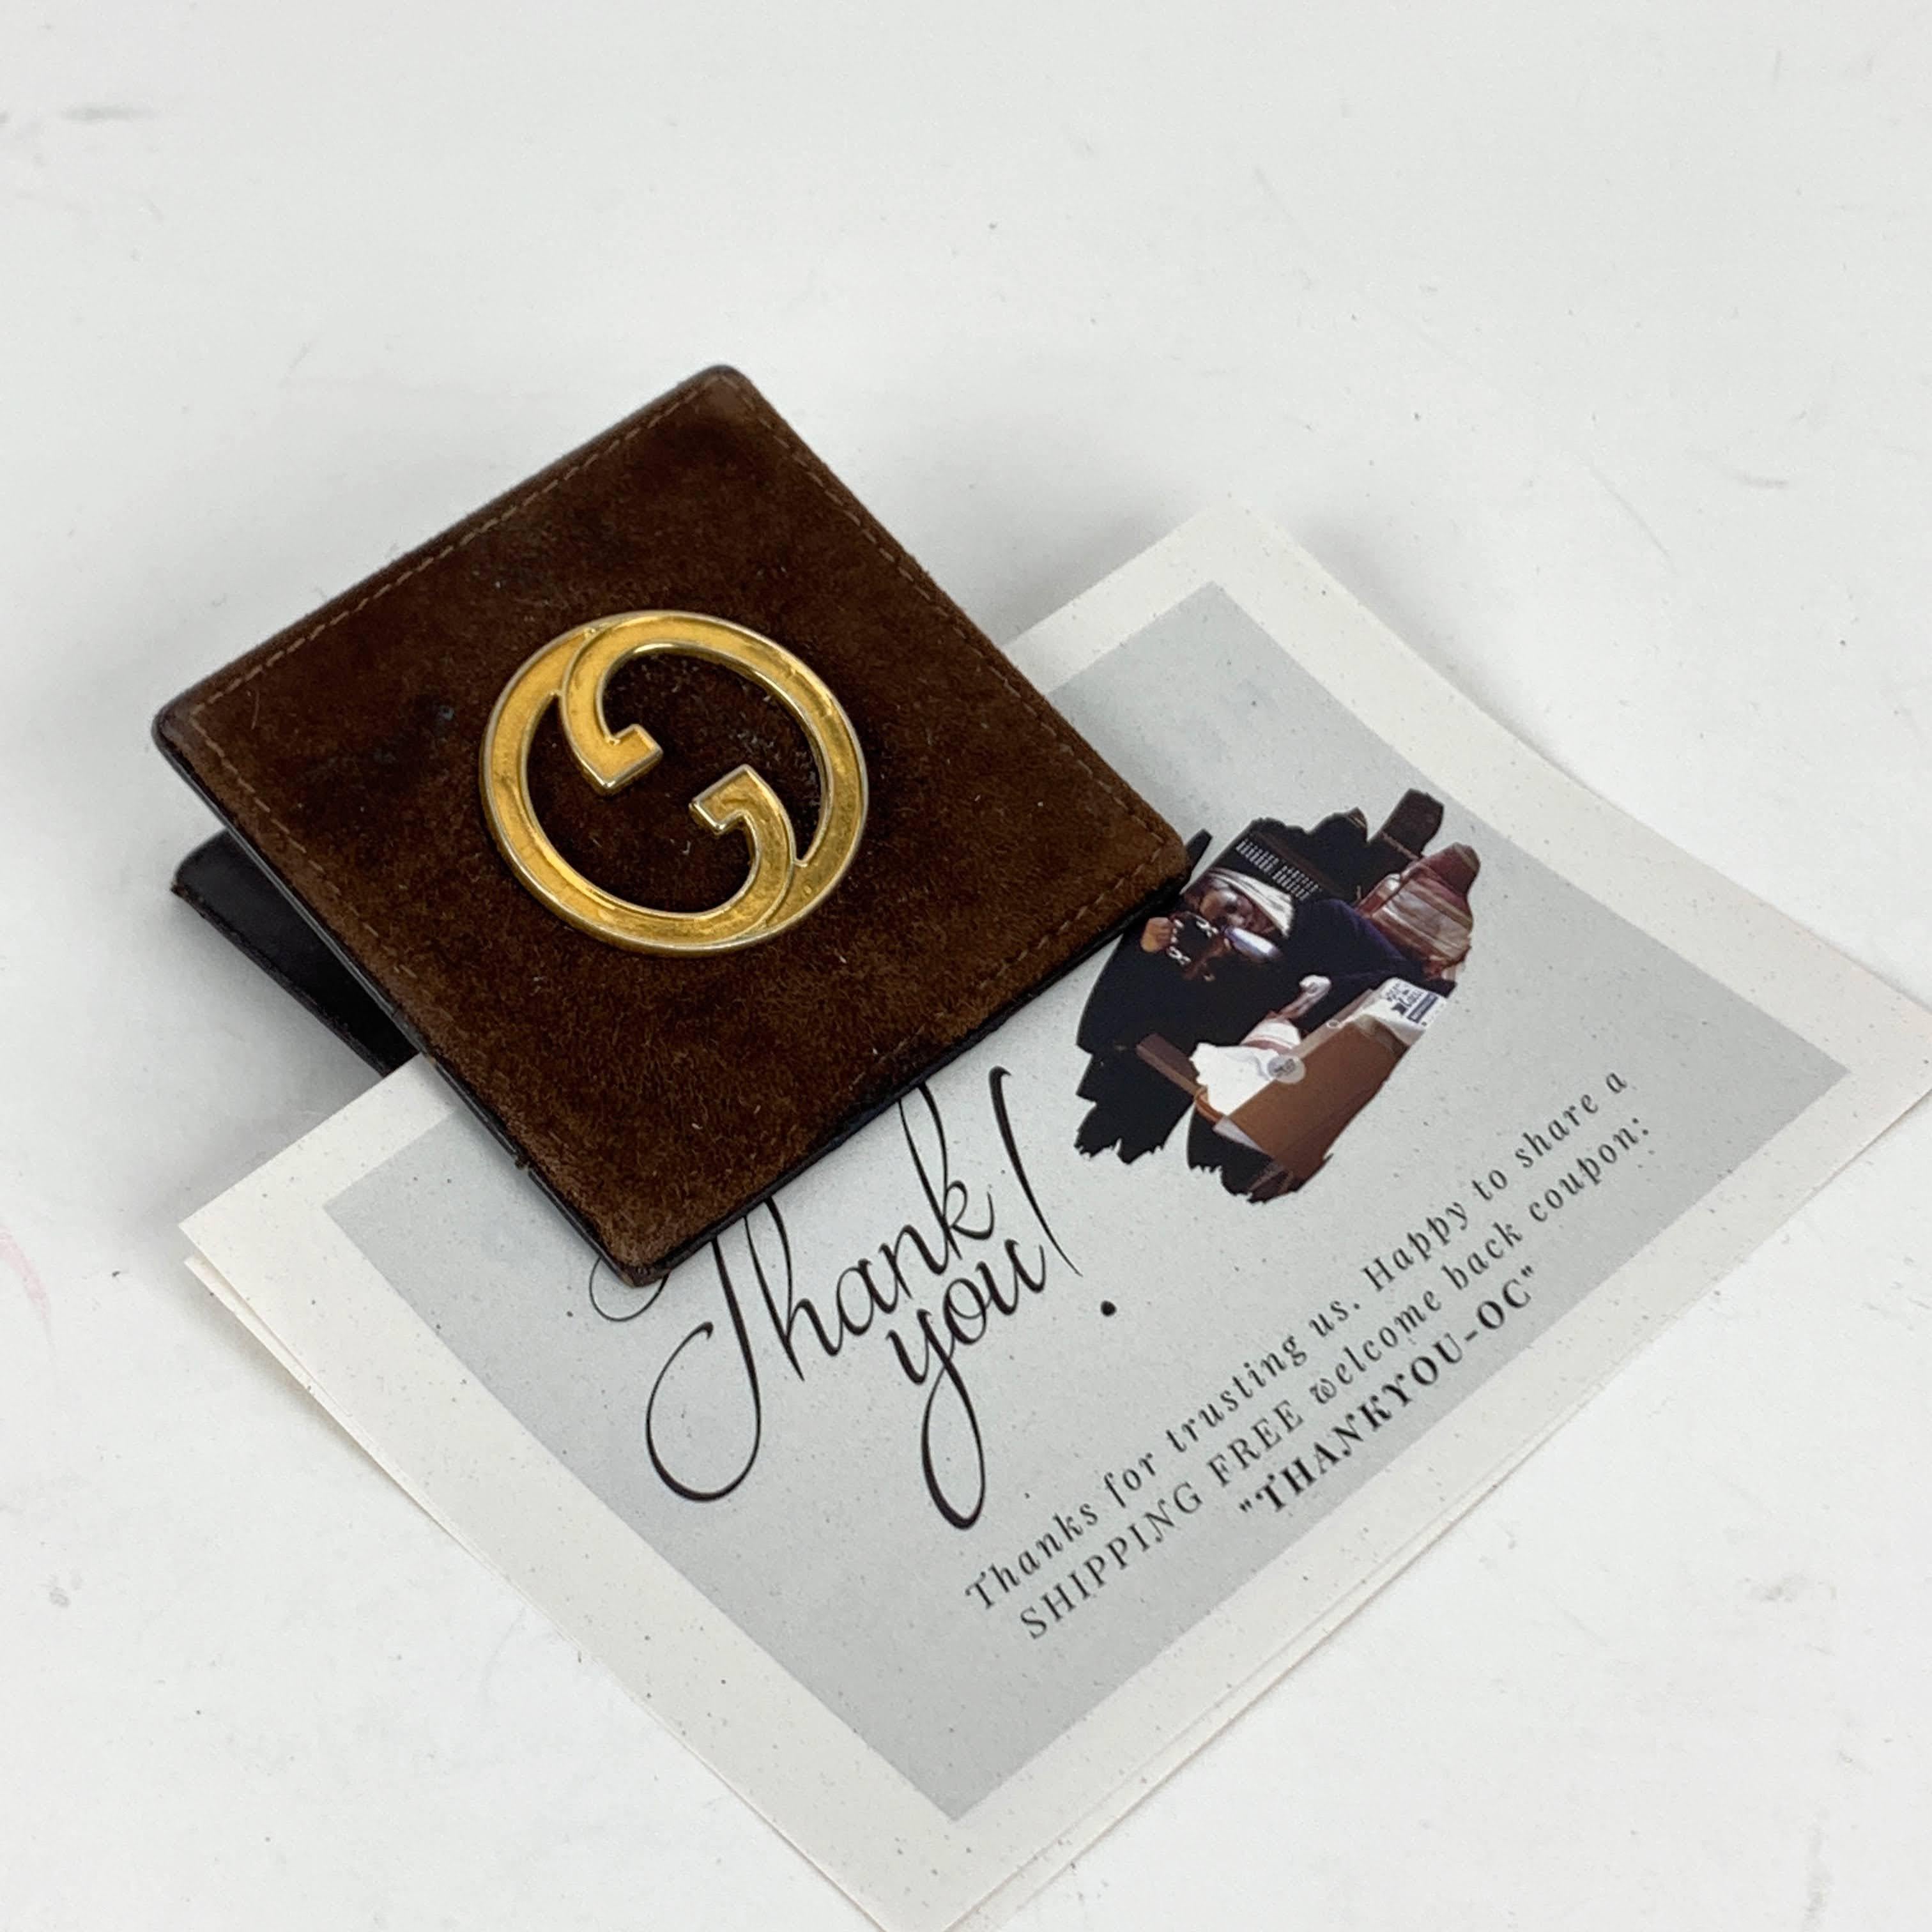 Vintage Gucci squared paper clip with gold metal GG logo on top. Made of brown leather and suede. Marked 'Made in Italy by Gucci' on the bottom. measurements: 3 x 3 inches - 7.6 x 7,6 cm

Details

MATERIAL: Leather

COLOR: Brown

MODEL: Paper